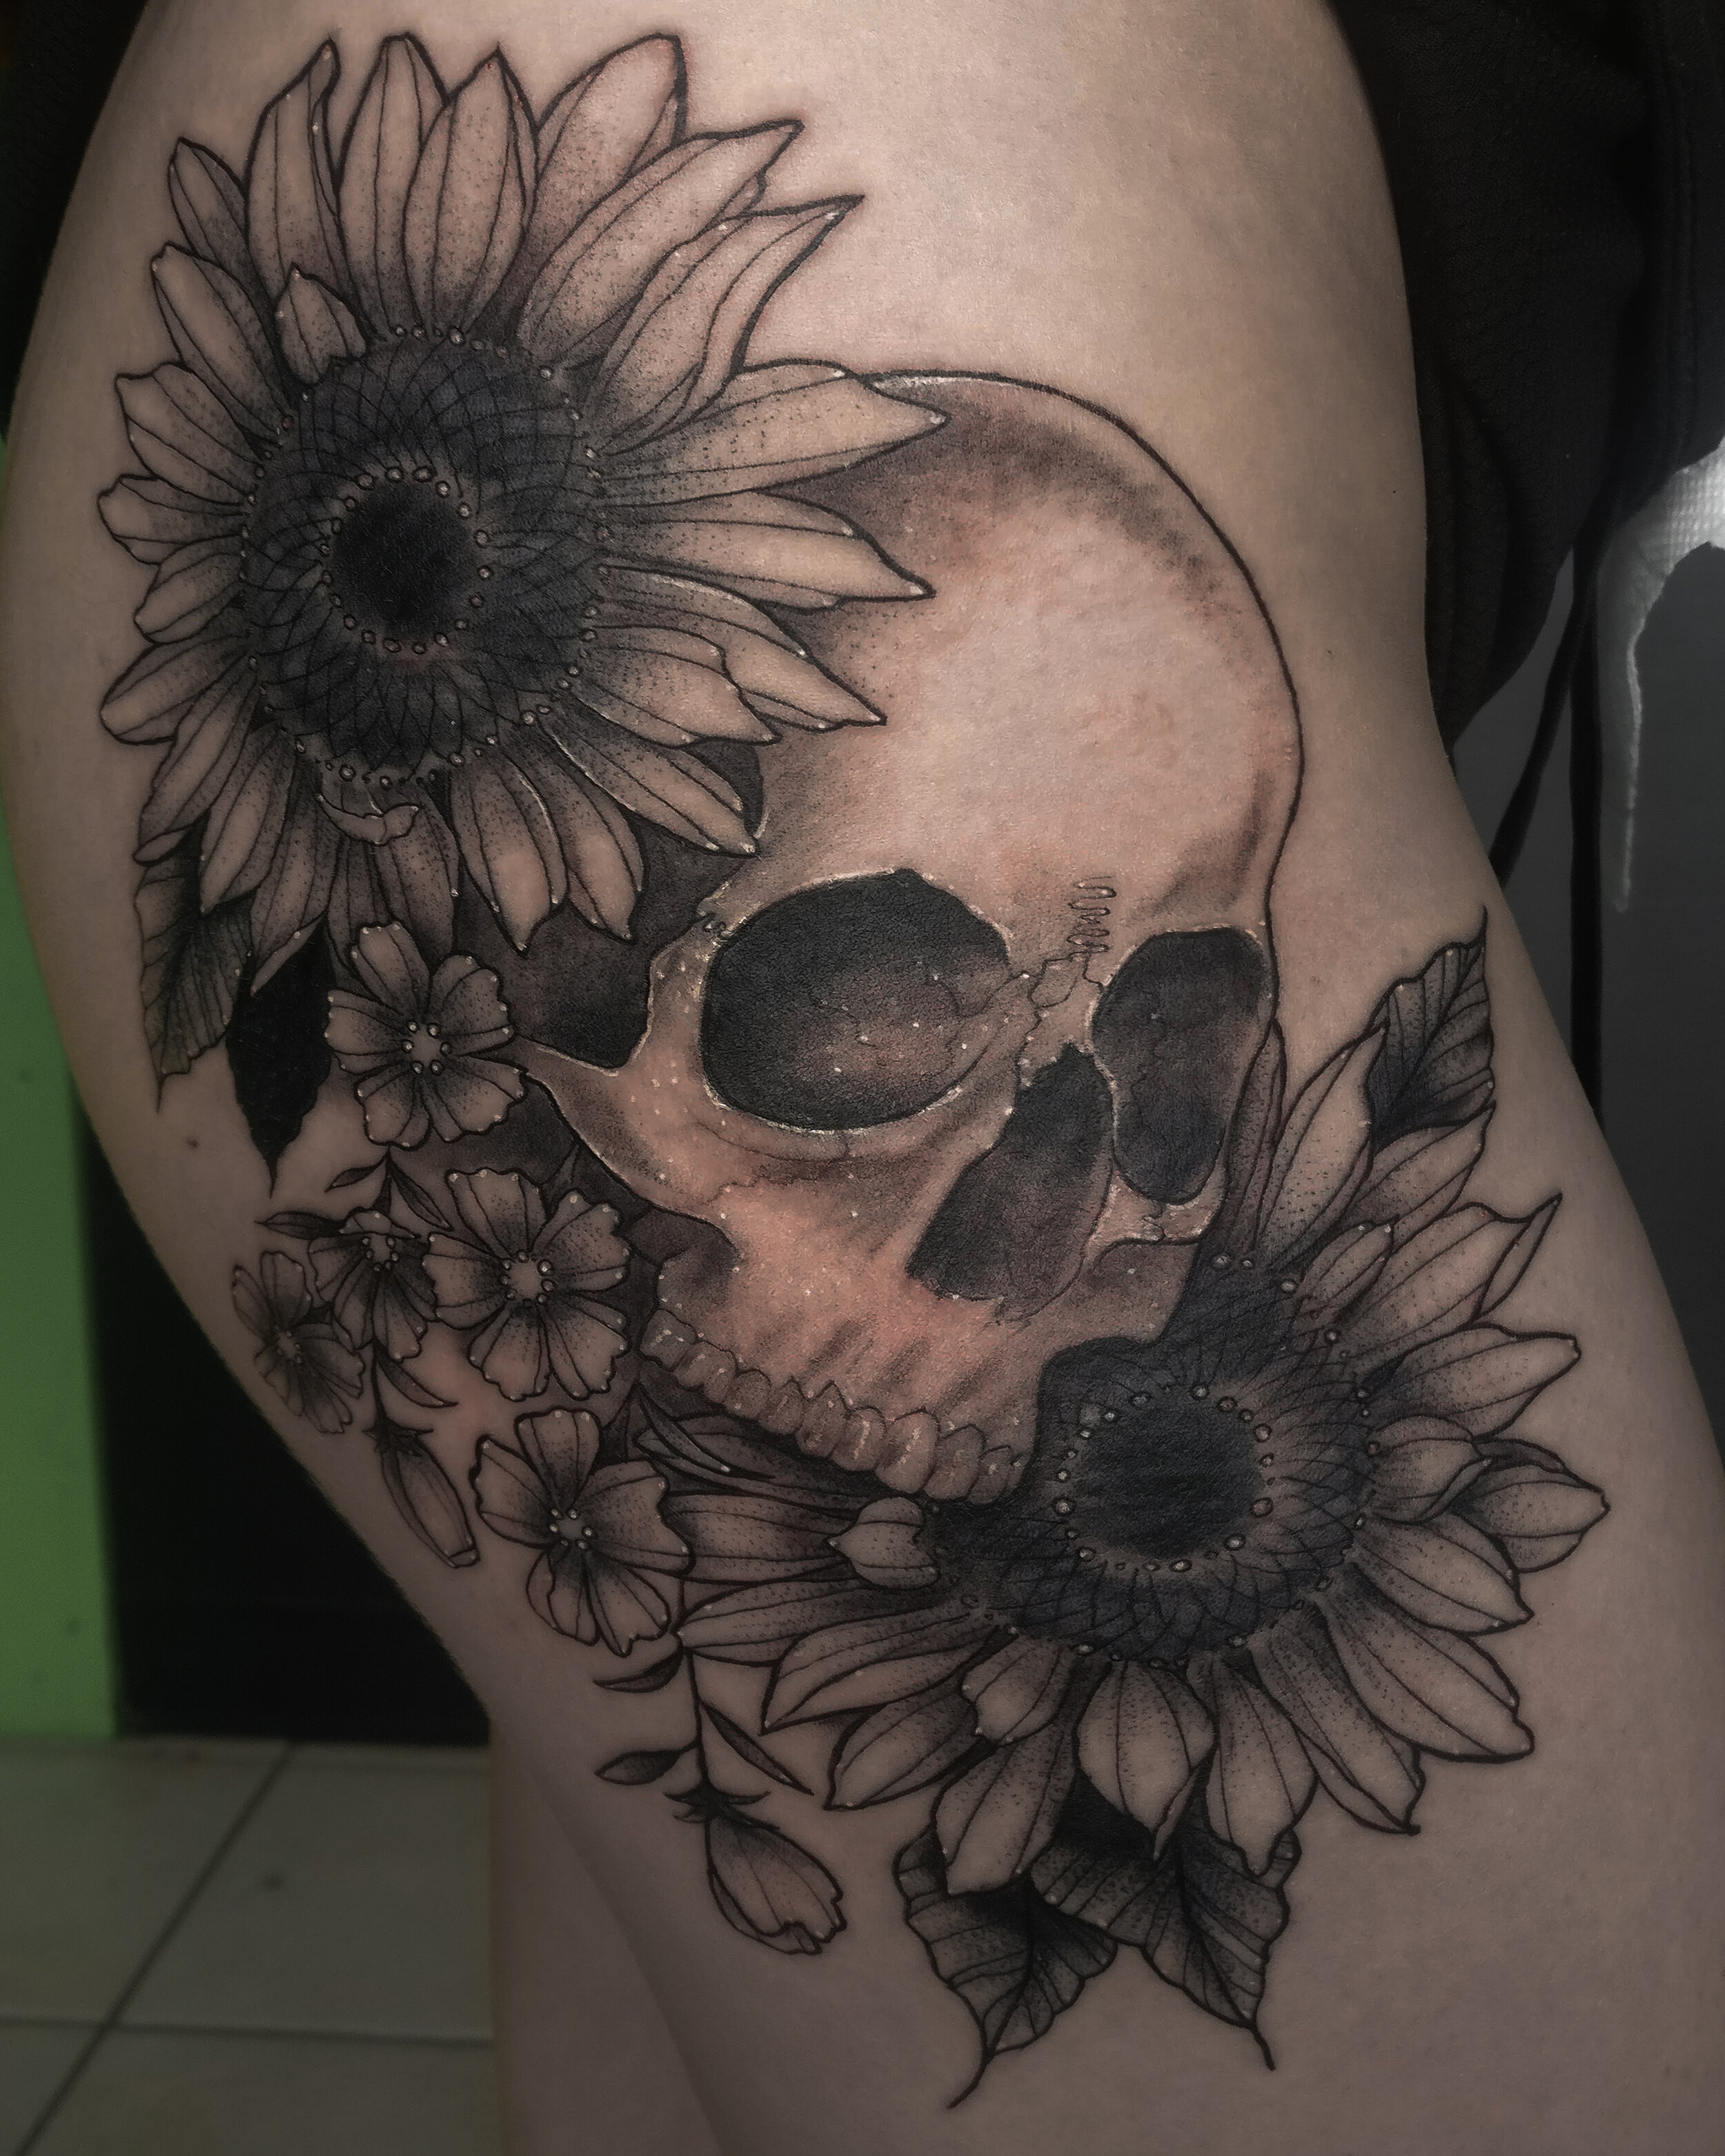 Skull with Sunflowers  by Artist   Ink Empire Tattoos  Facebook